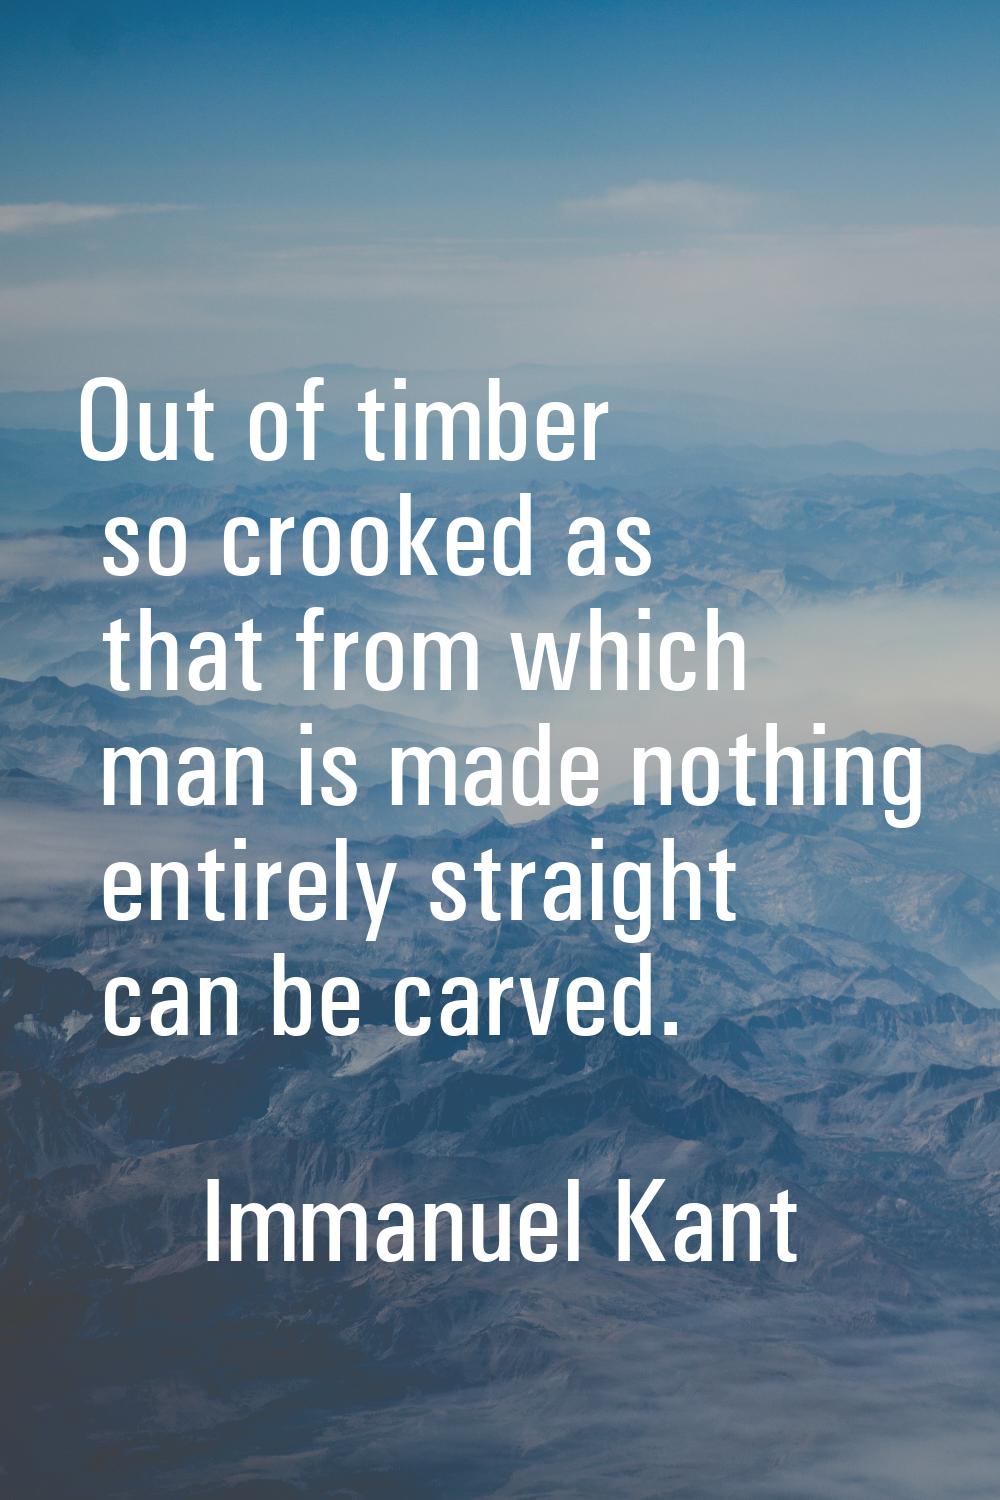 Out of timber so crooked as that from which man is made nothing entirely straight can be carved.